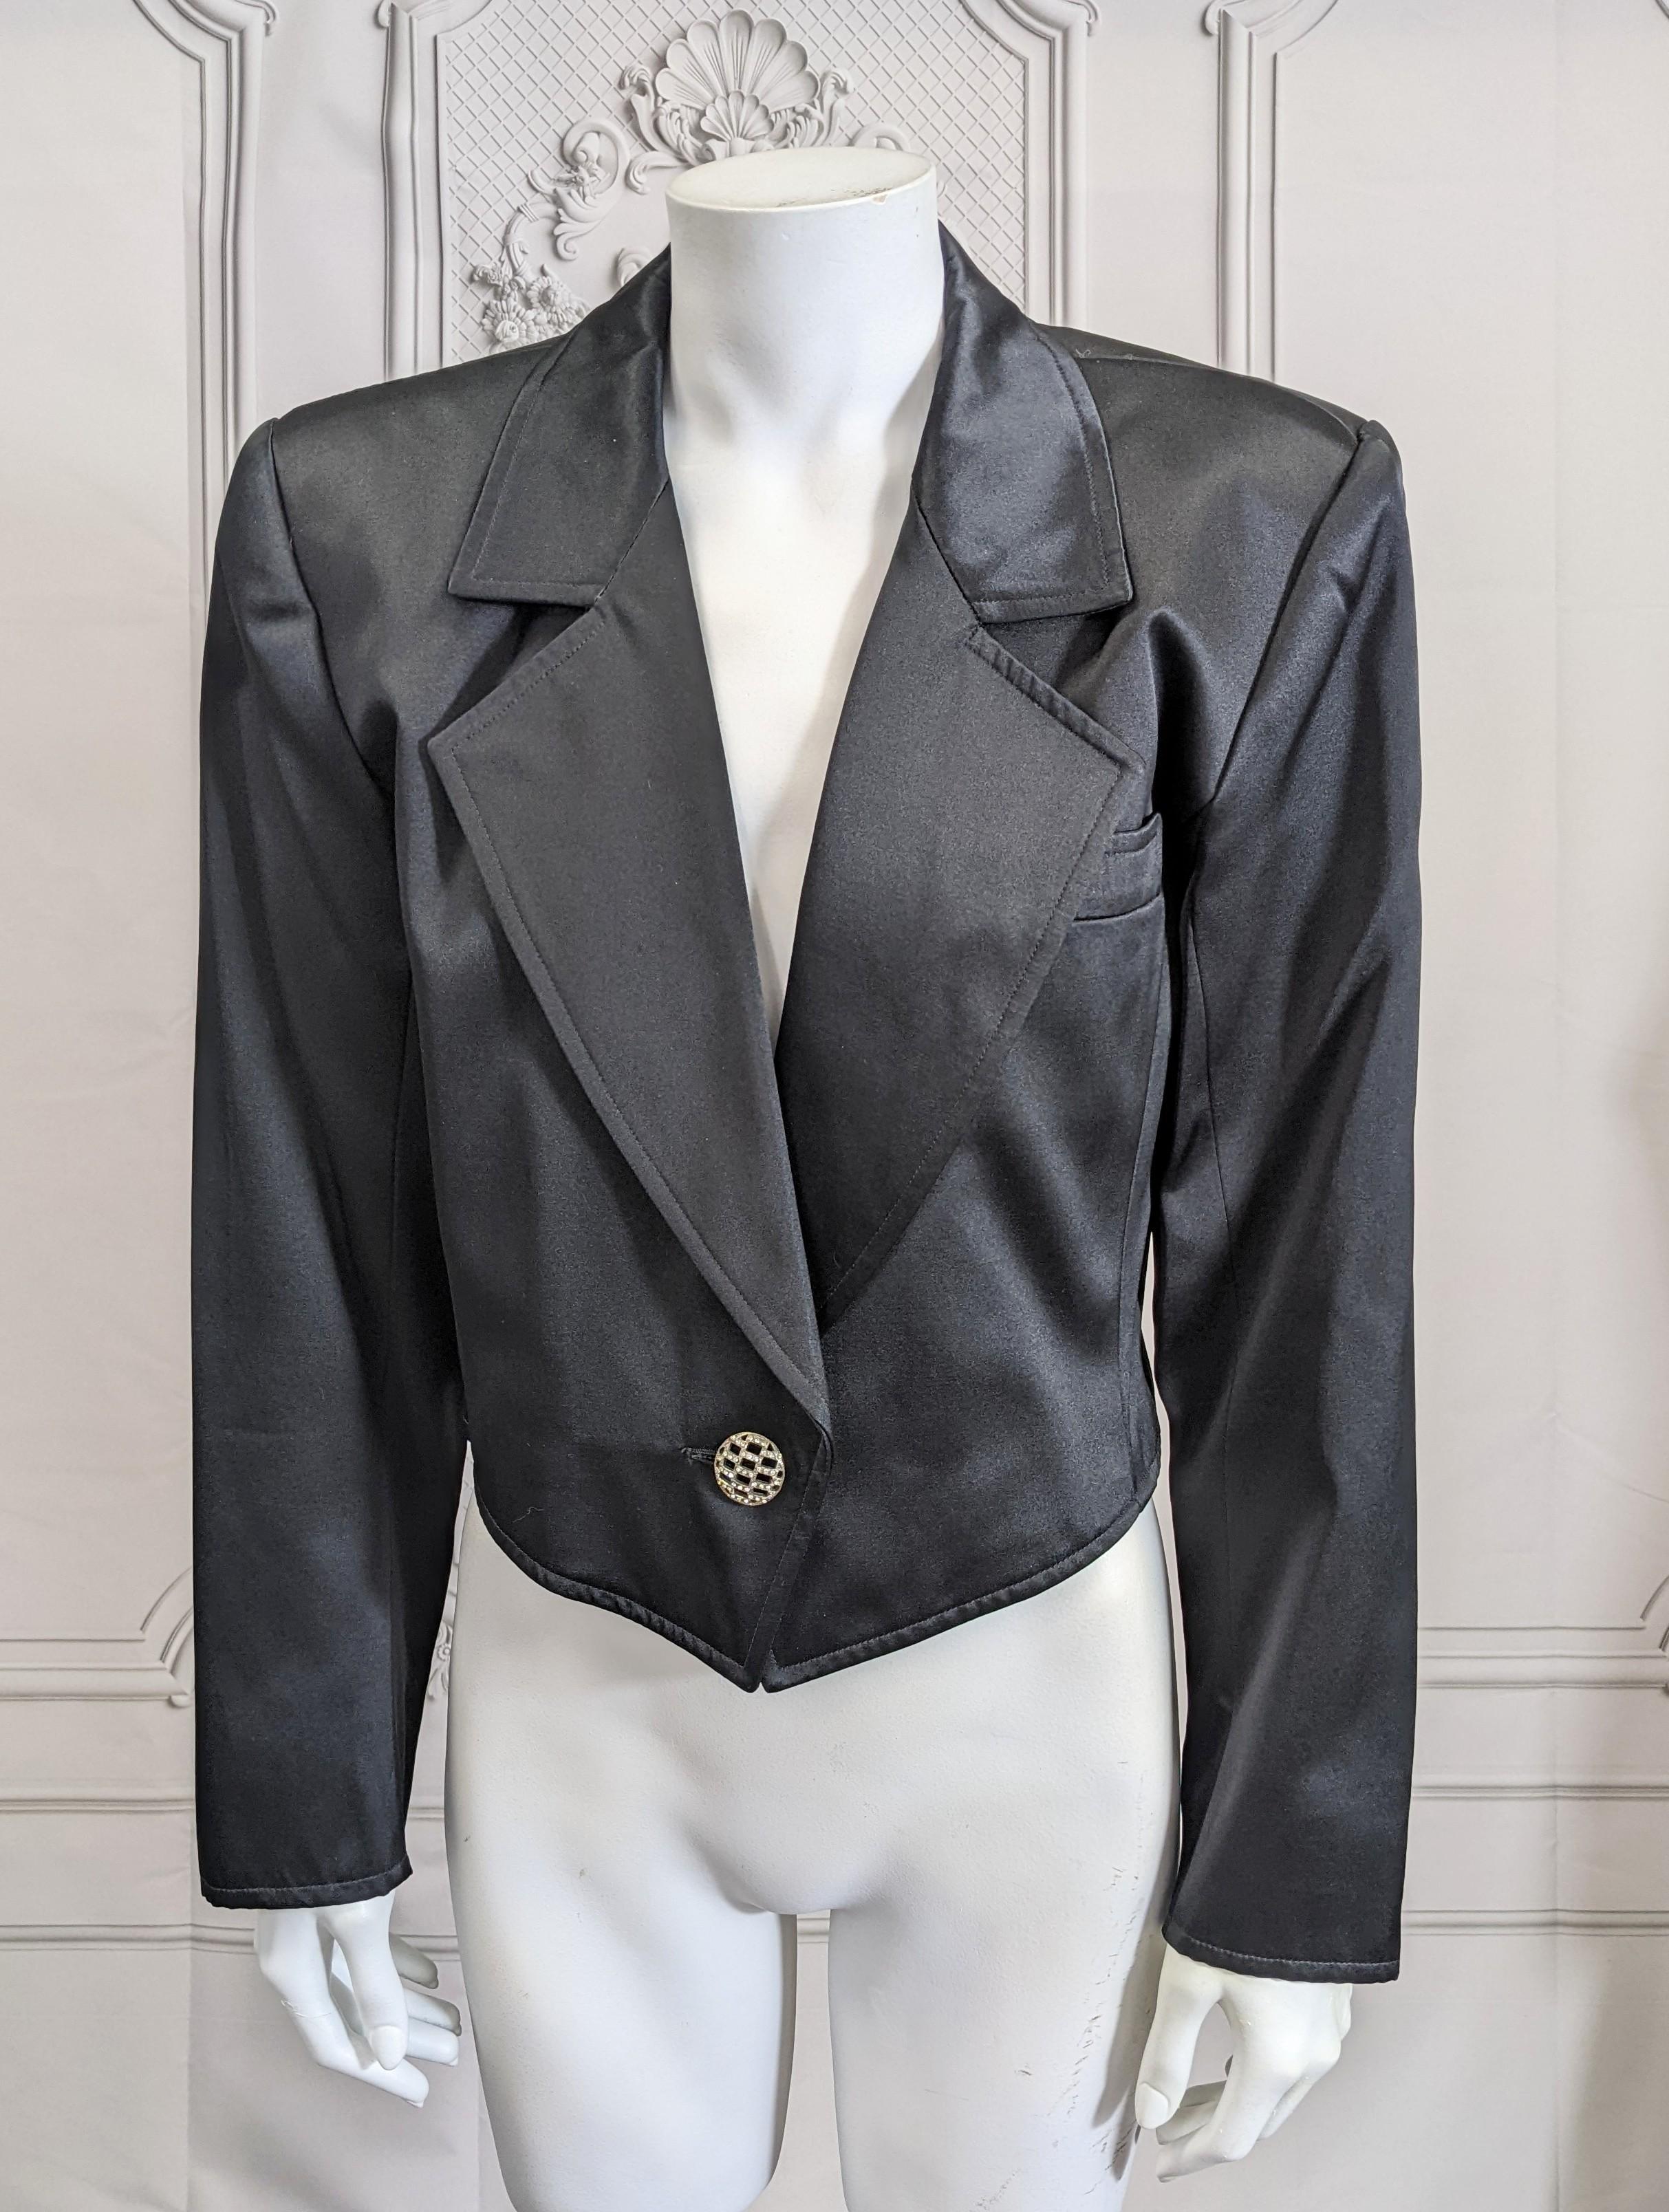 Iconic Yves Saint Laurent Satin Spencer Tuxedo Jacket from the 1980's with crystal decorated buttons at waist and cuffs. Super strong shoulders with tapered cropped cut in satin. Size 38. France 1980's. 
